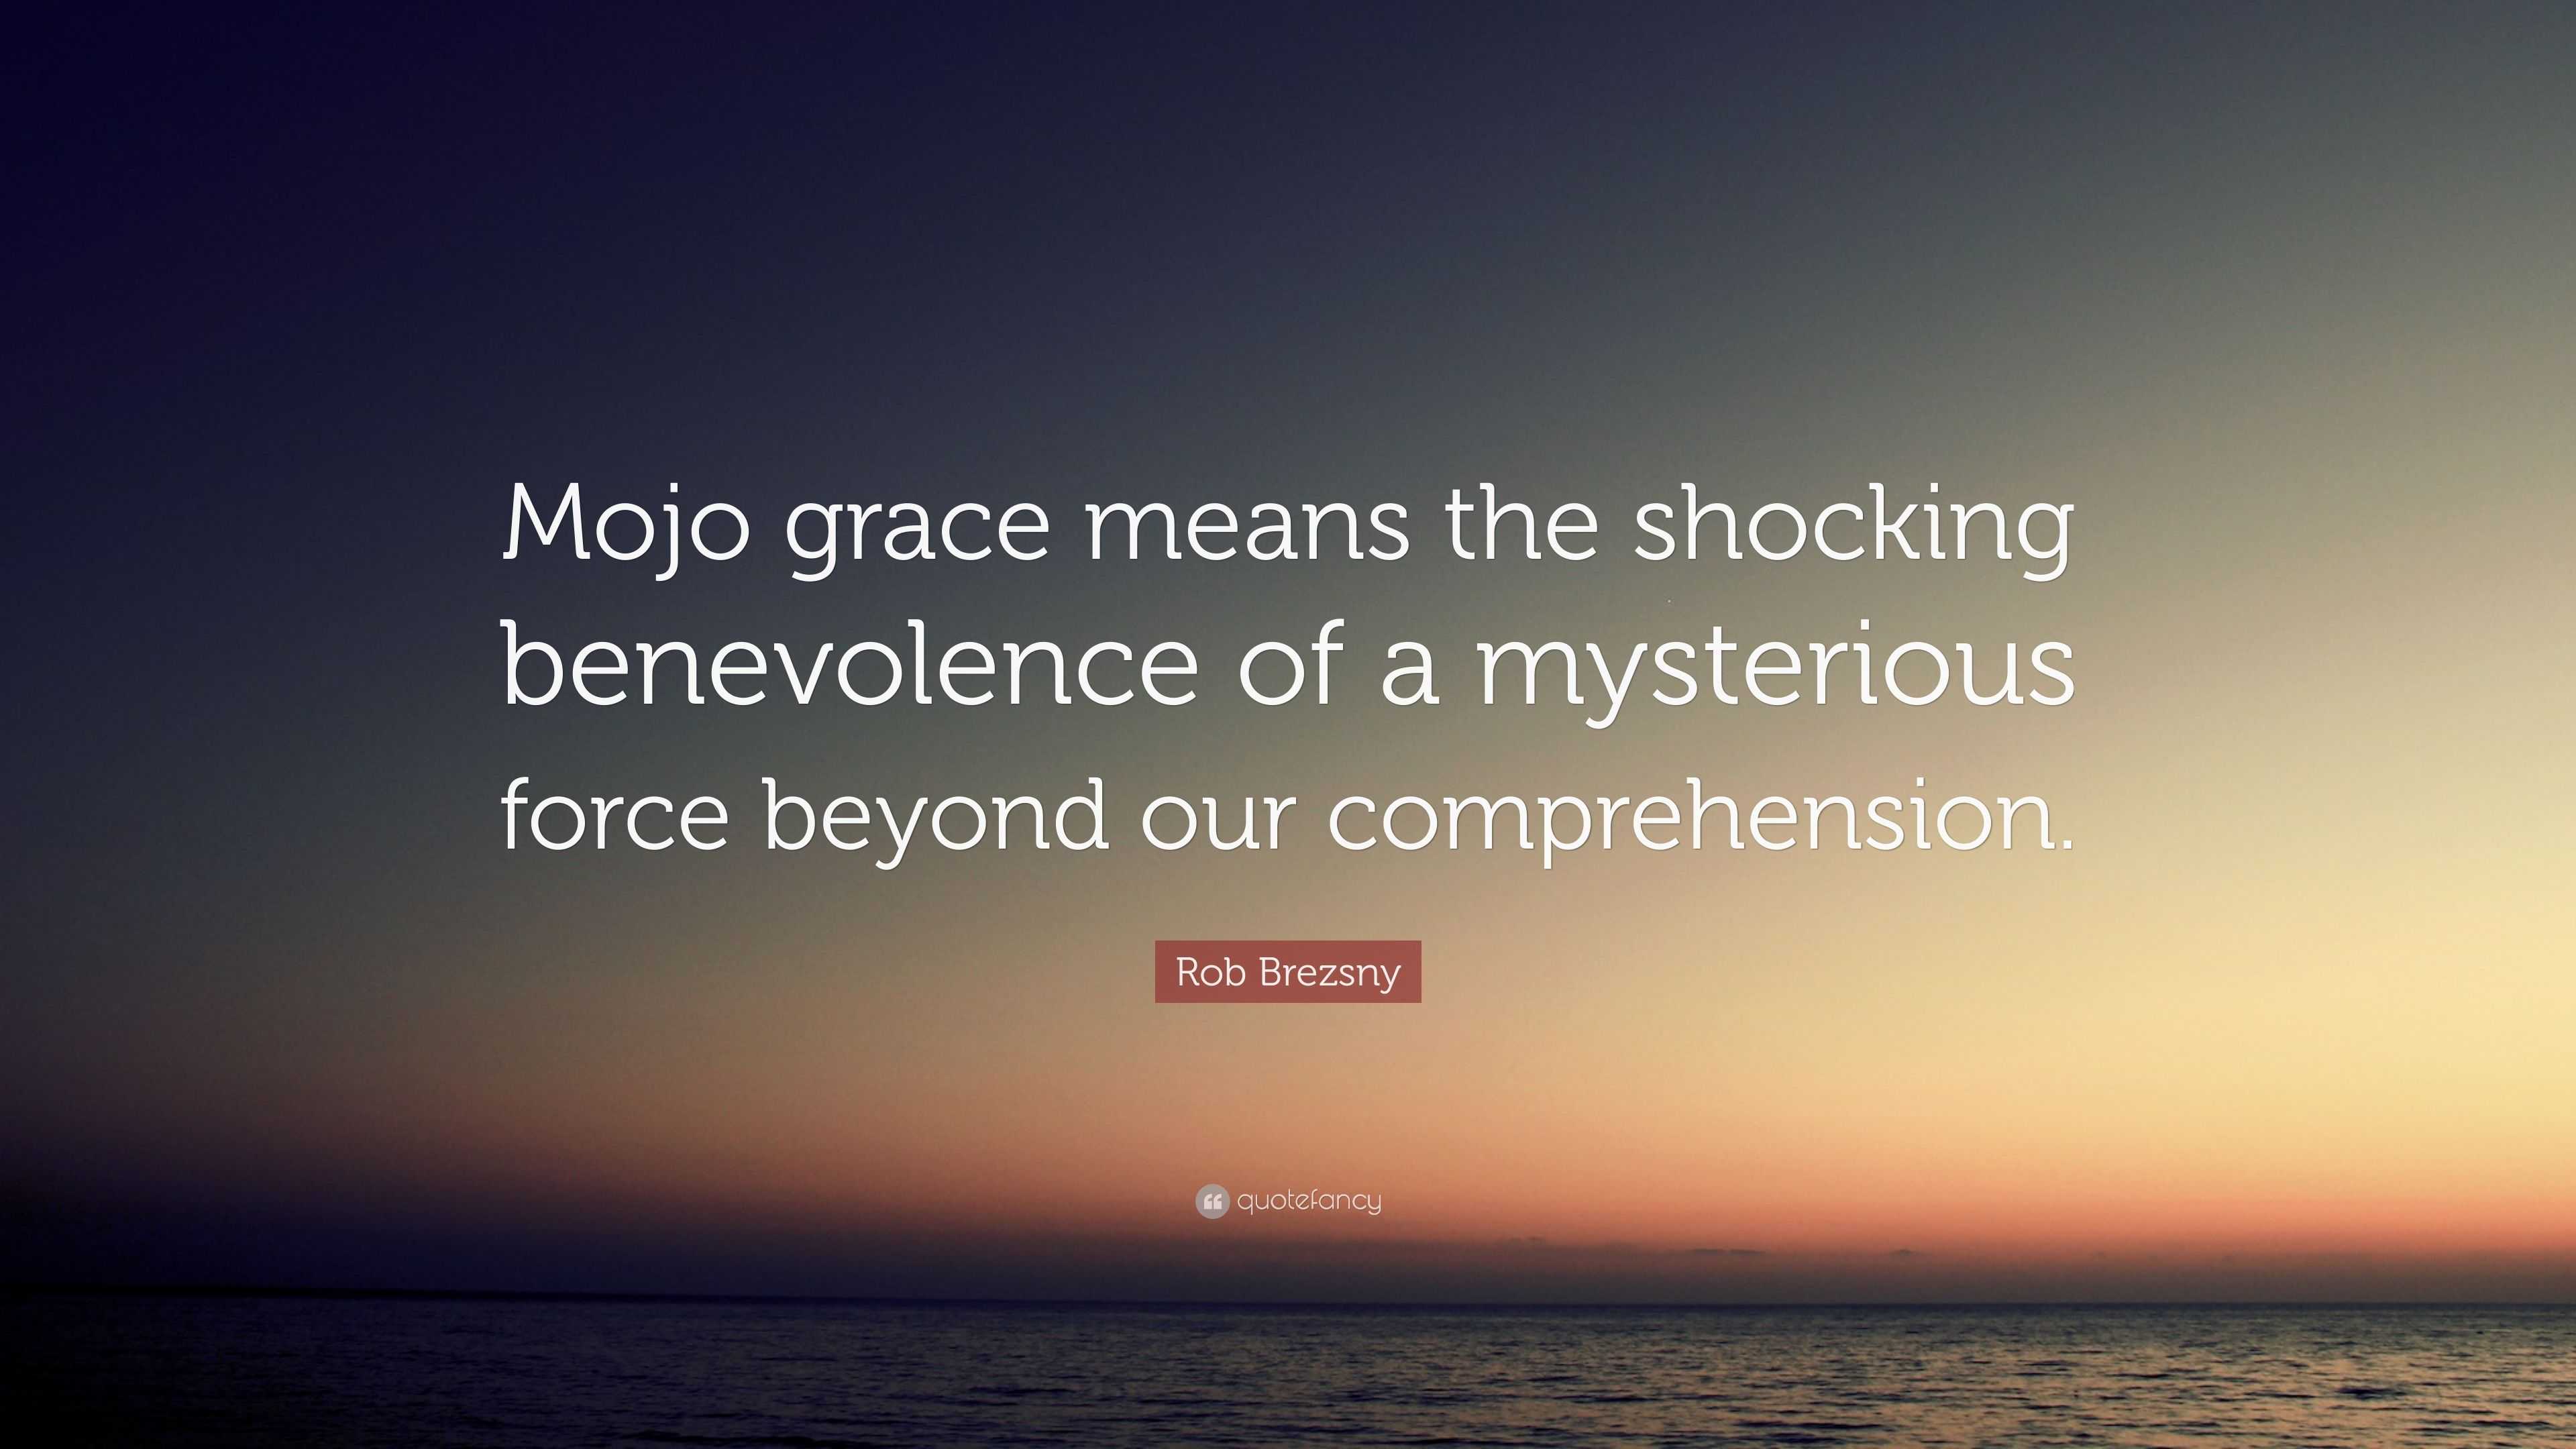 Rob Brezsny Quote: “Mojo grace means the shocking benevolence of a mysterious  force beyond our comprehension.”